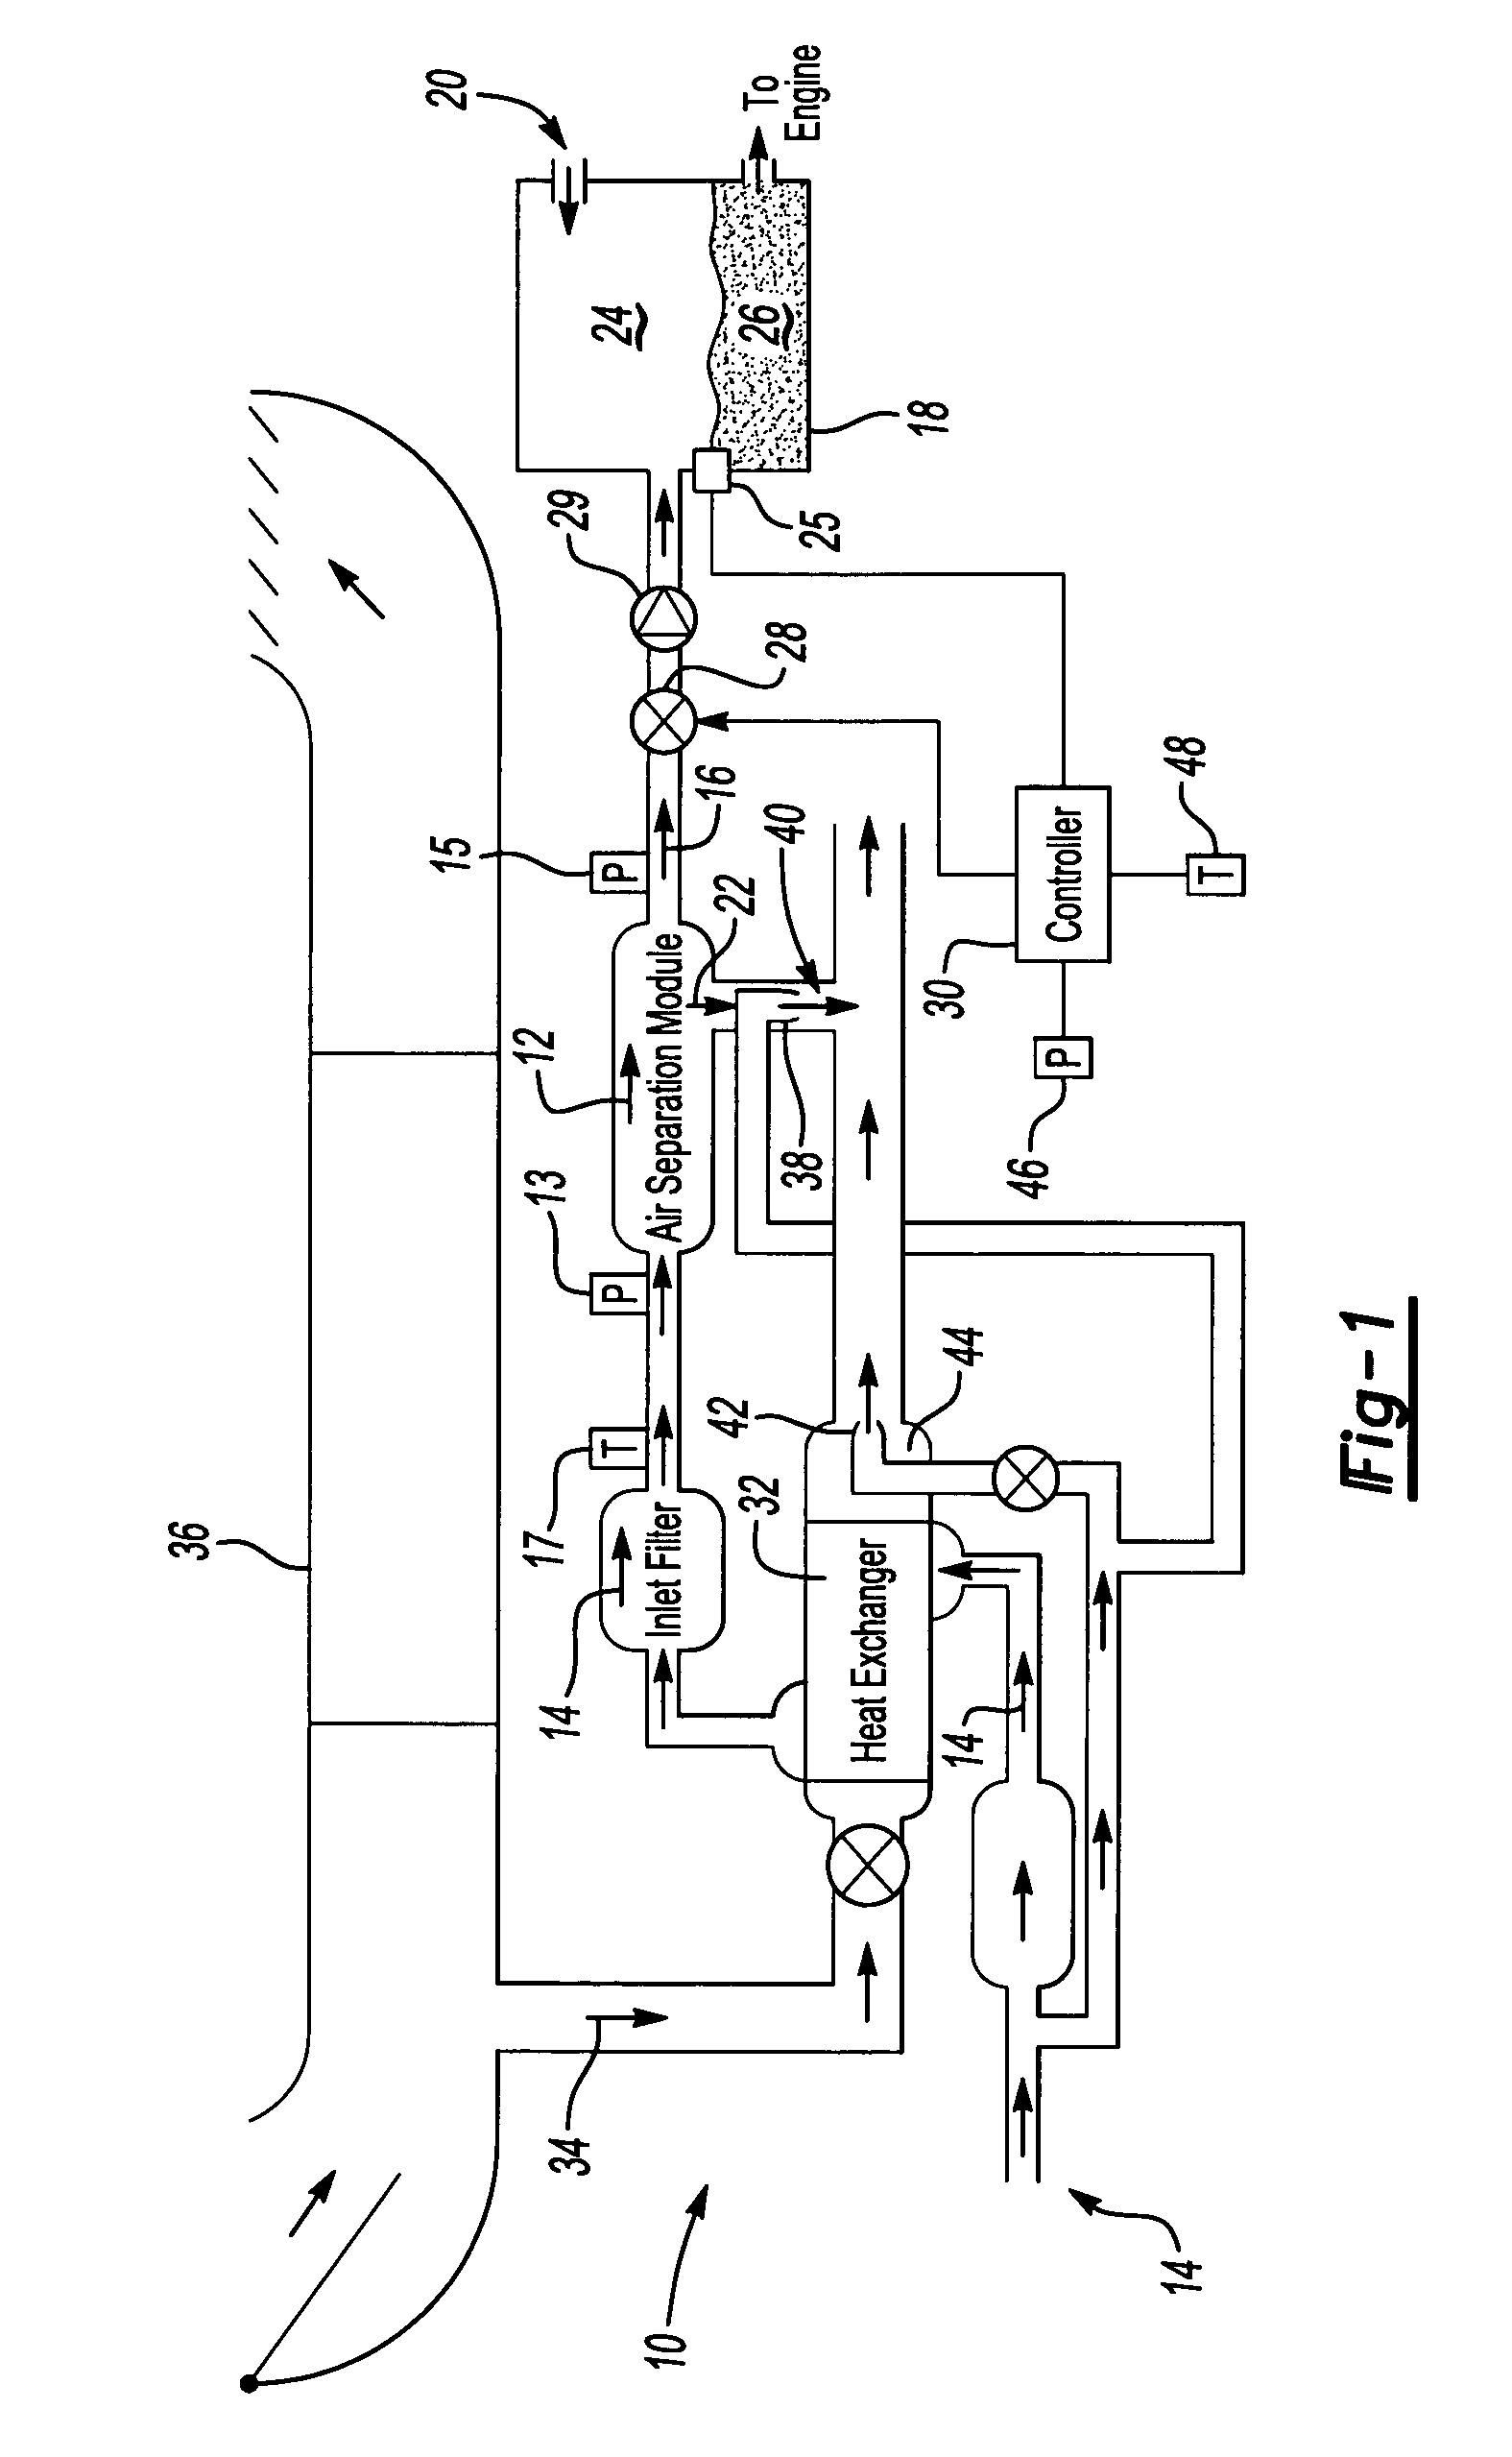 Flow control for on-board inert gas generation system